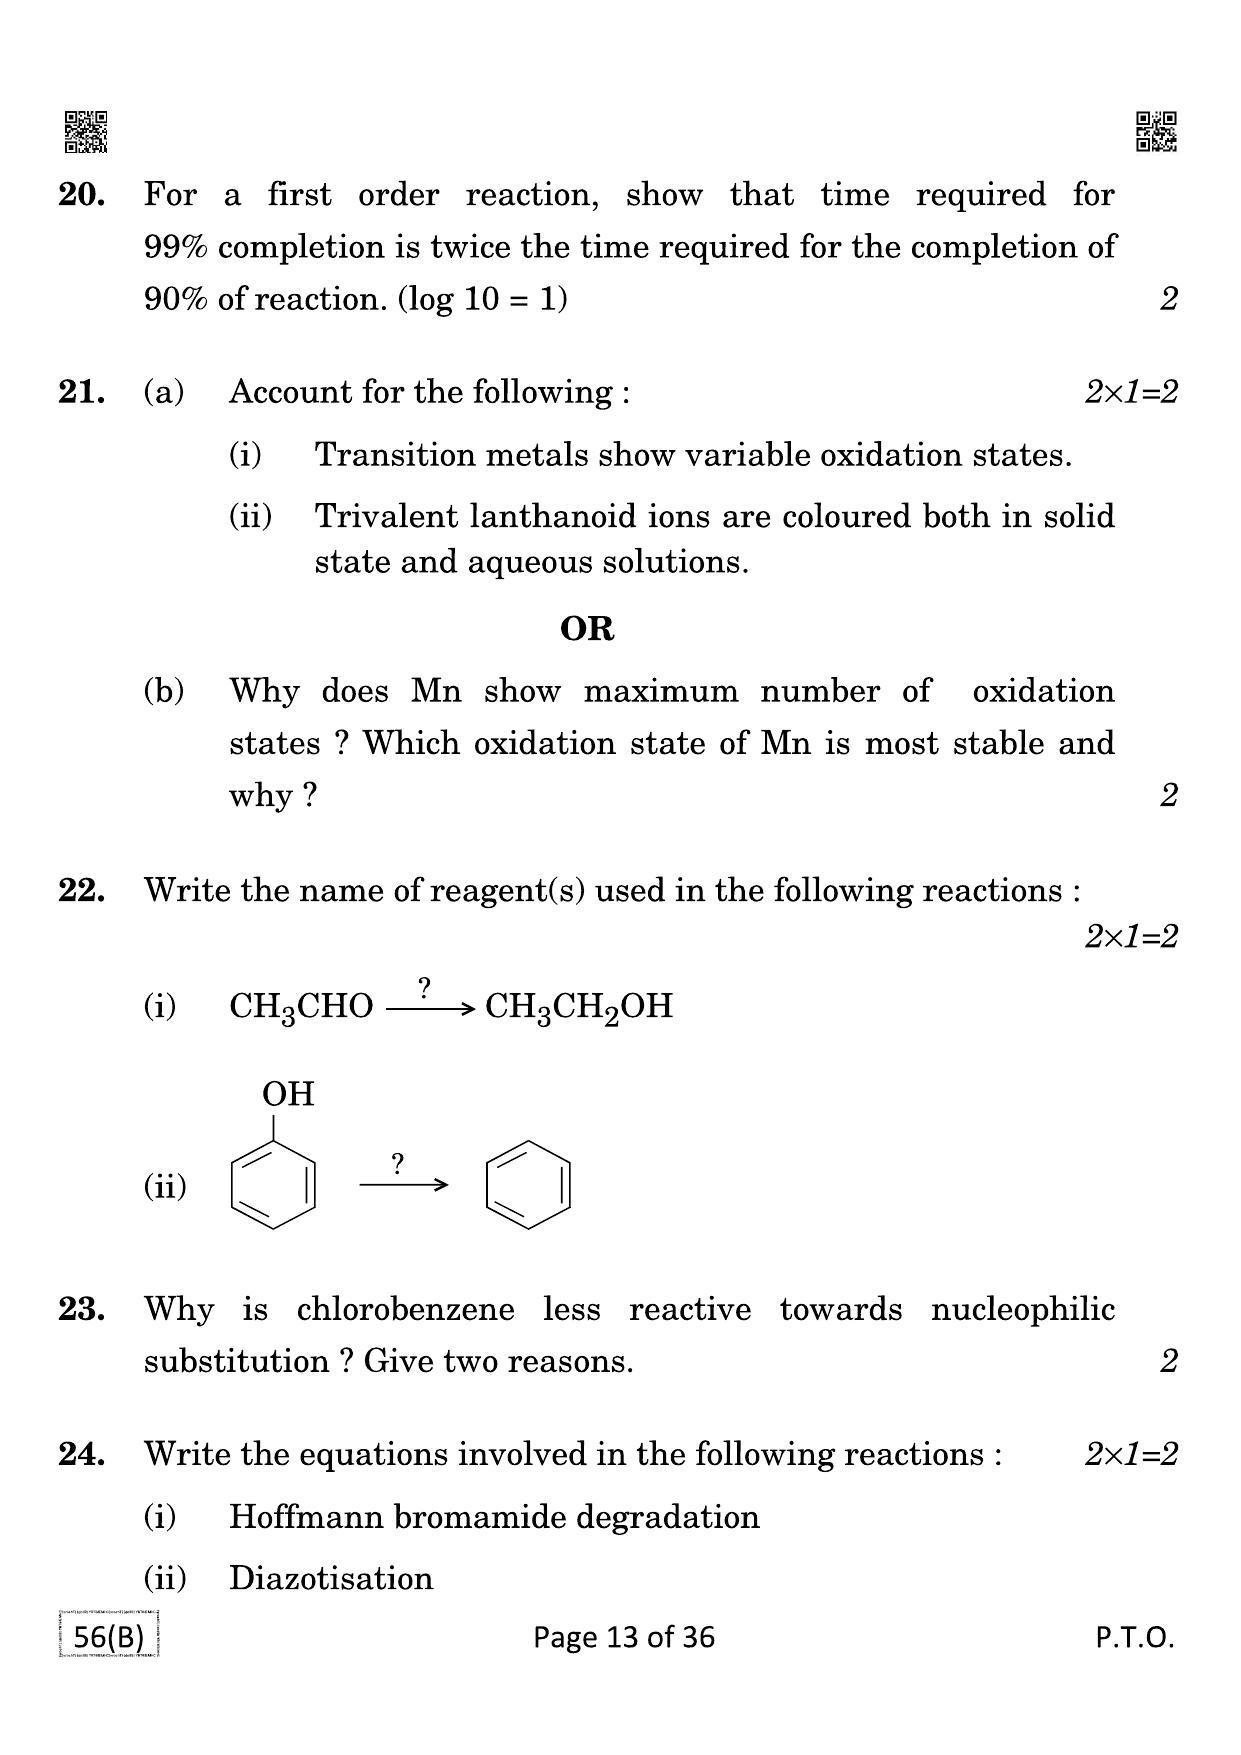 CBSE Class 12 QP_043_CHEMISTRY_FOR_BLIND_CANDIDATES 2021 Compartment Question Paper - Page 13